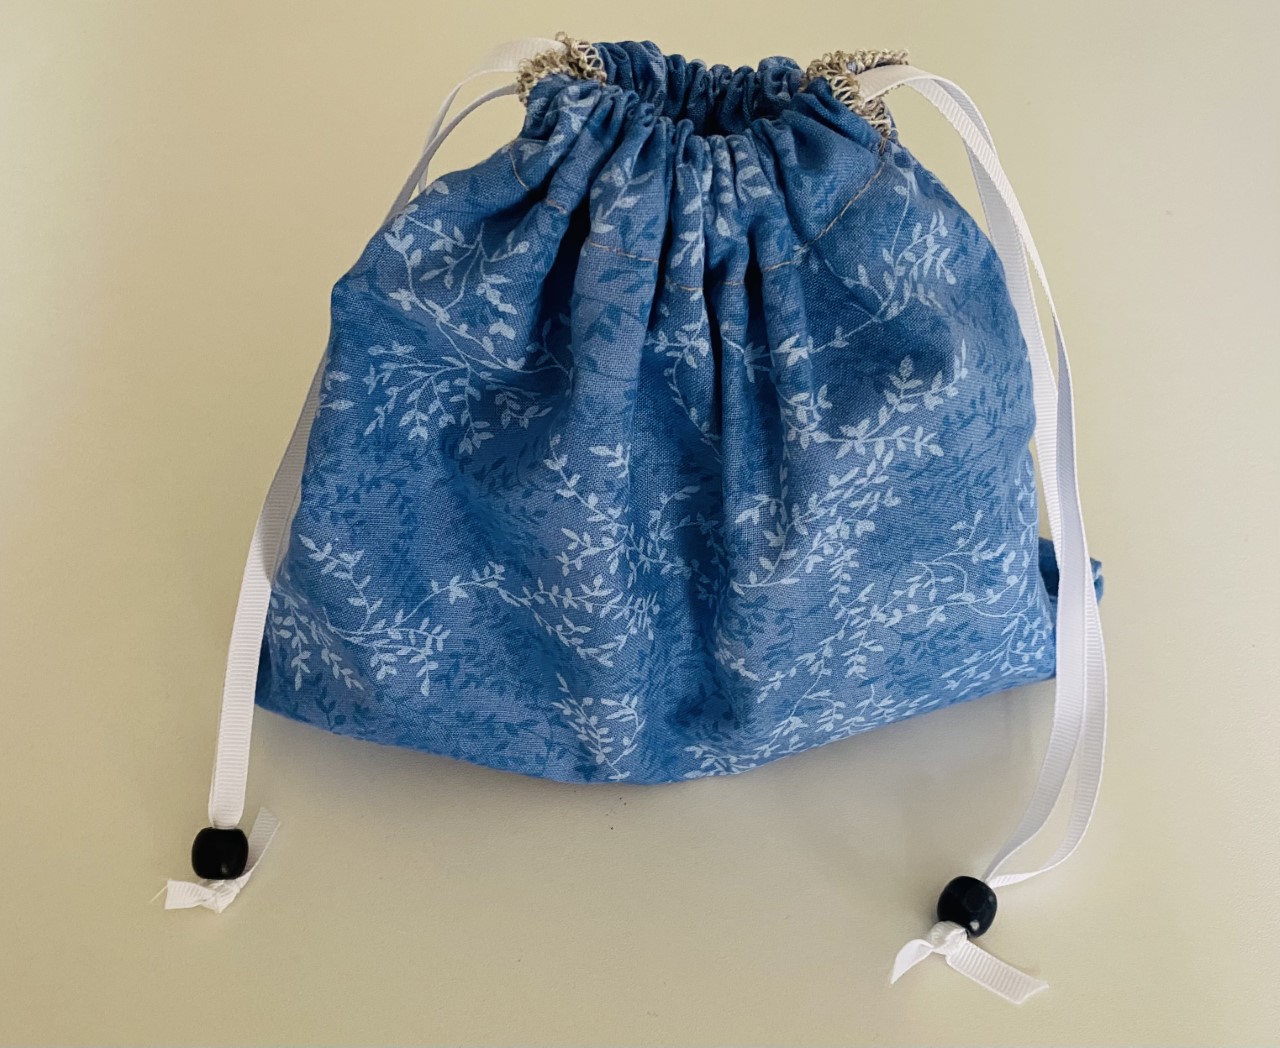 Ten inch drawstring bag with blue and white leaf pattern and small bead accents on white ribbon drawstrings